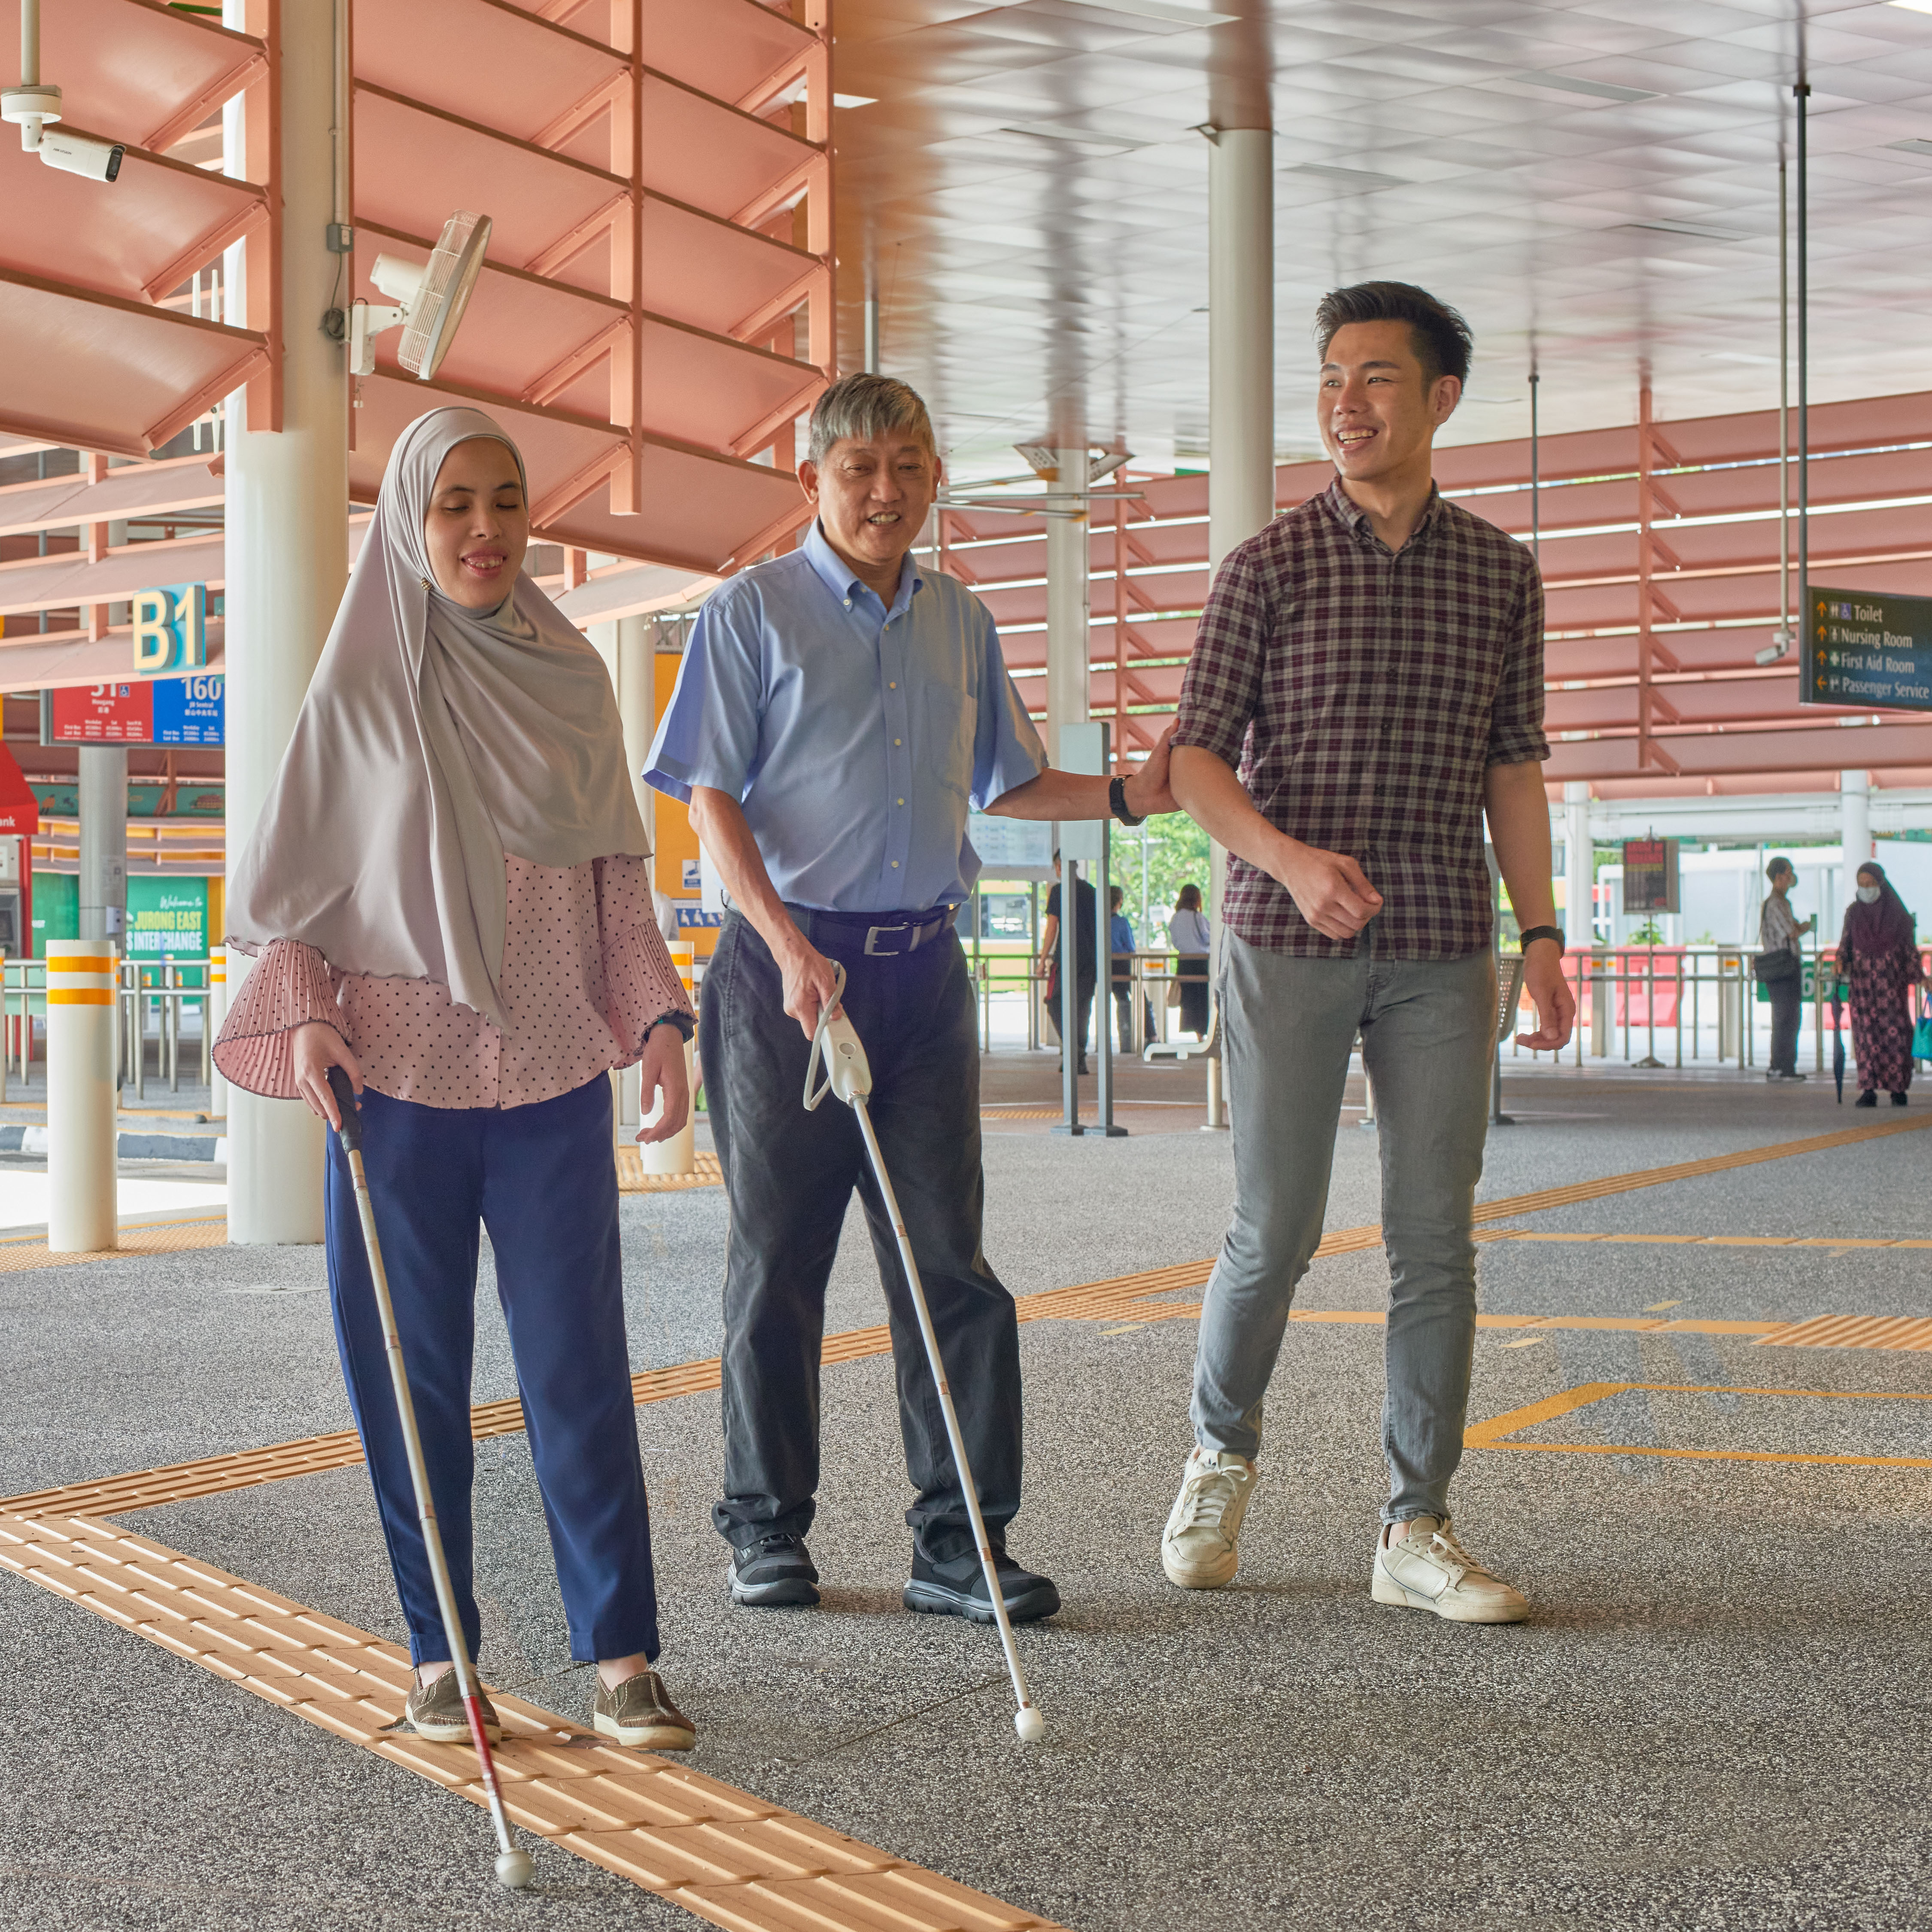 A man and woman, both with visual impairment, walking with another person without disability at a bus interchange.